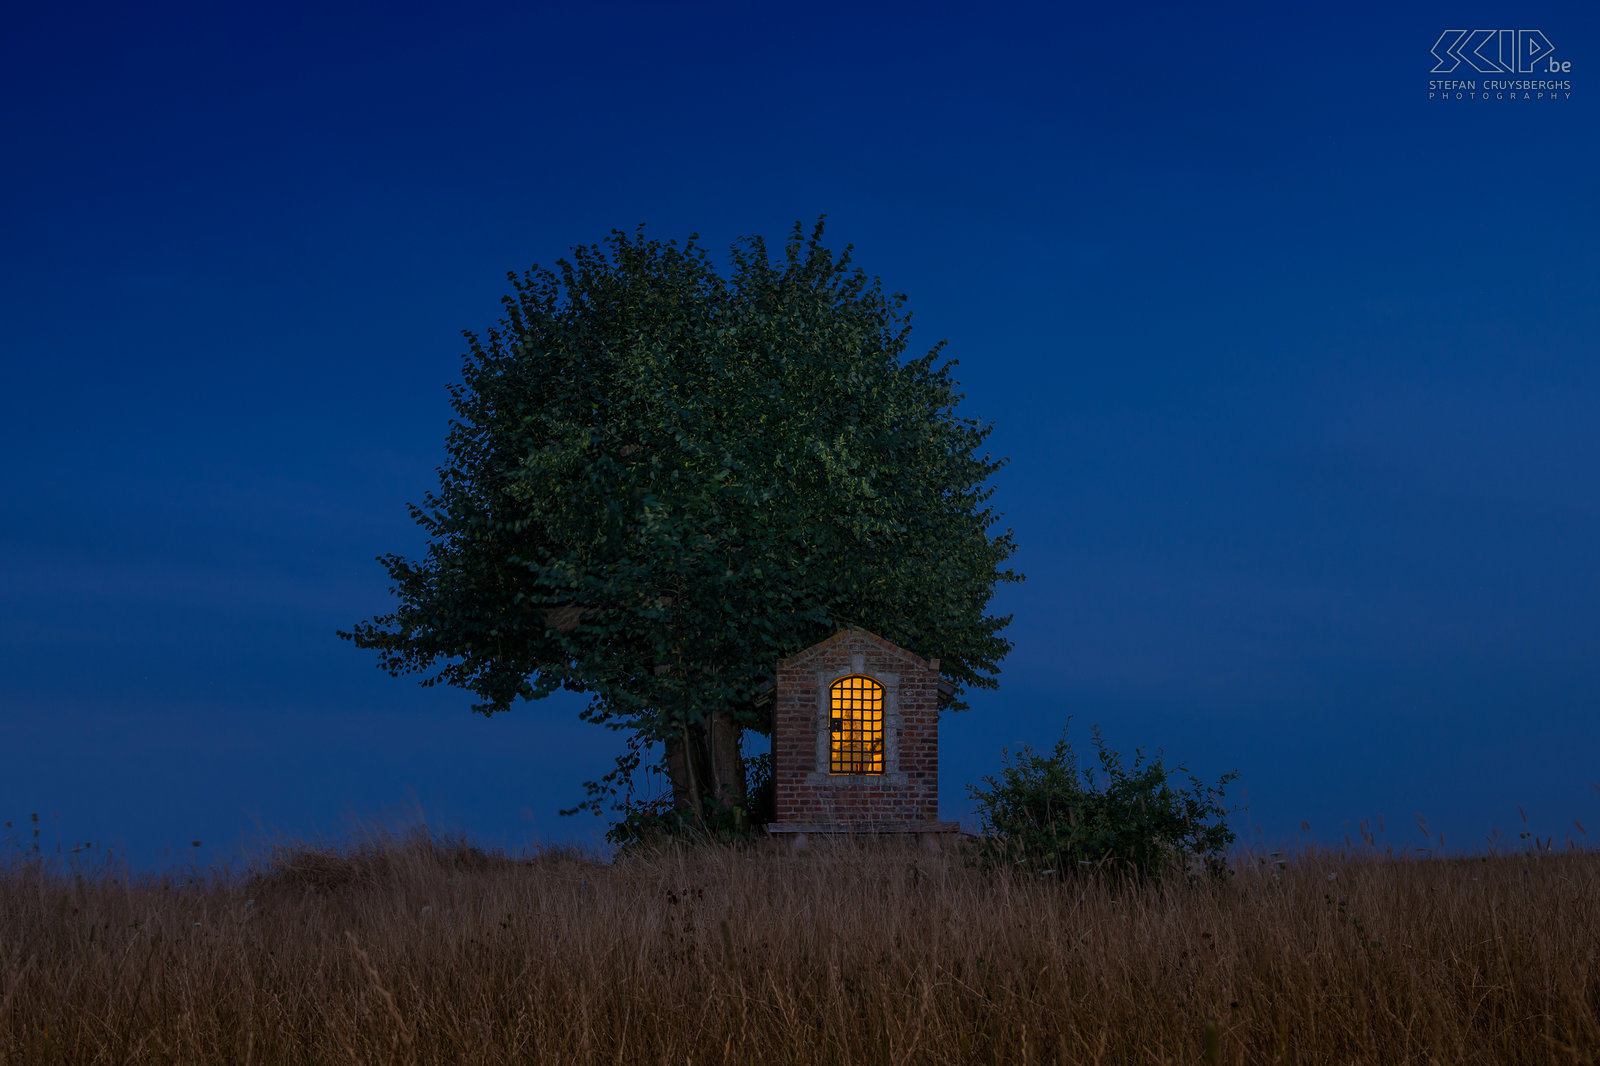 Hageland by night - Saint Joseph chapel Under an old lime tree in the middle of the fields in the village of Sint-Pieters-Rode (Holsbeek) the Saint Joseph's chapel is located. The simple chapel consists of bricks and a sandstone frame. It dates from the early 19th century. This photo was made July in the beginning of the blue hour (the hour after sunset). Stefan Cruysberghs